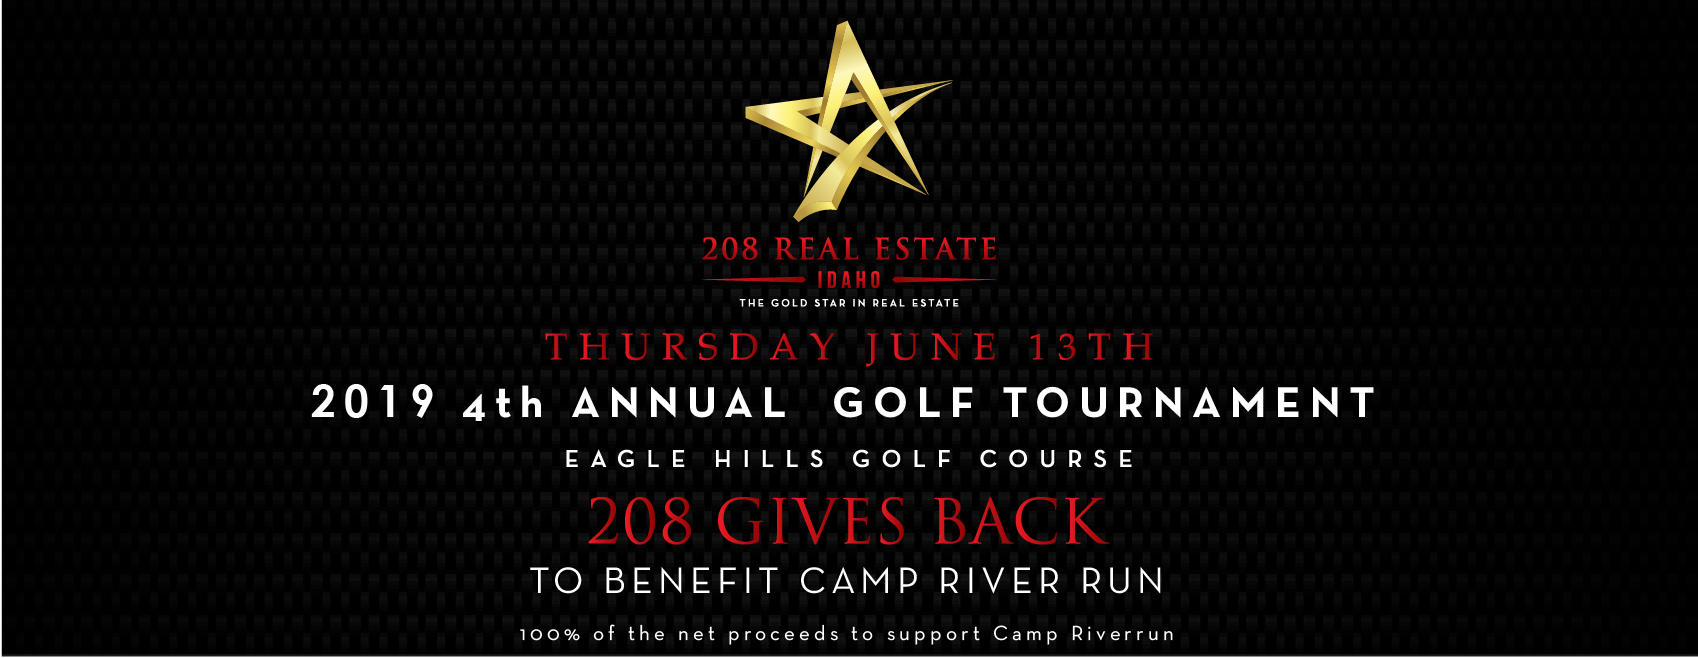 4th Annual 208 Gives Back Golf Tournament to benefit Camp River Run